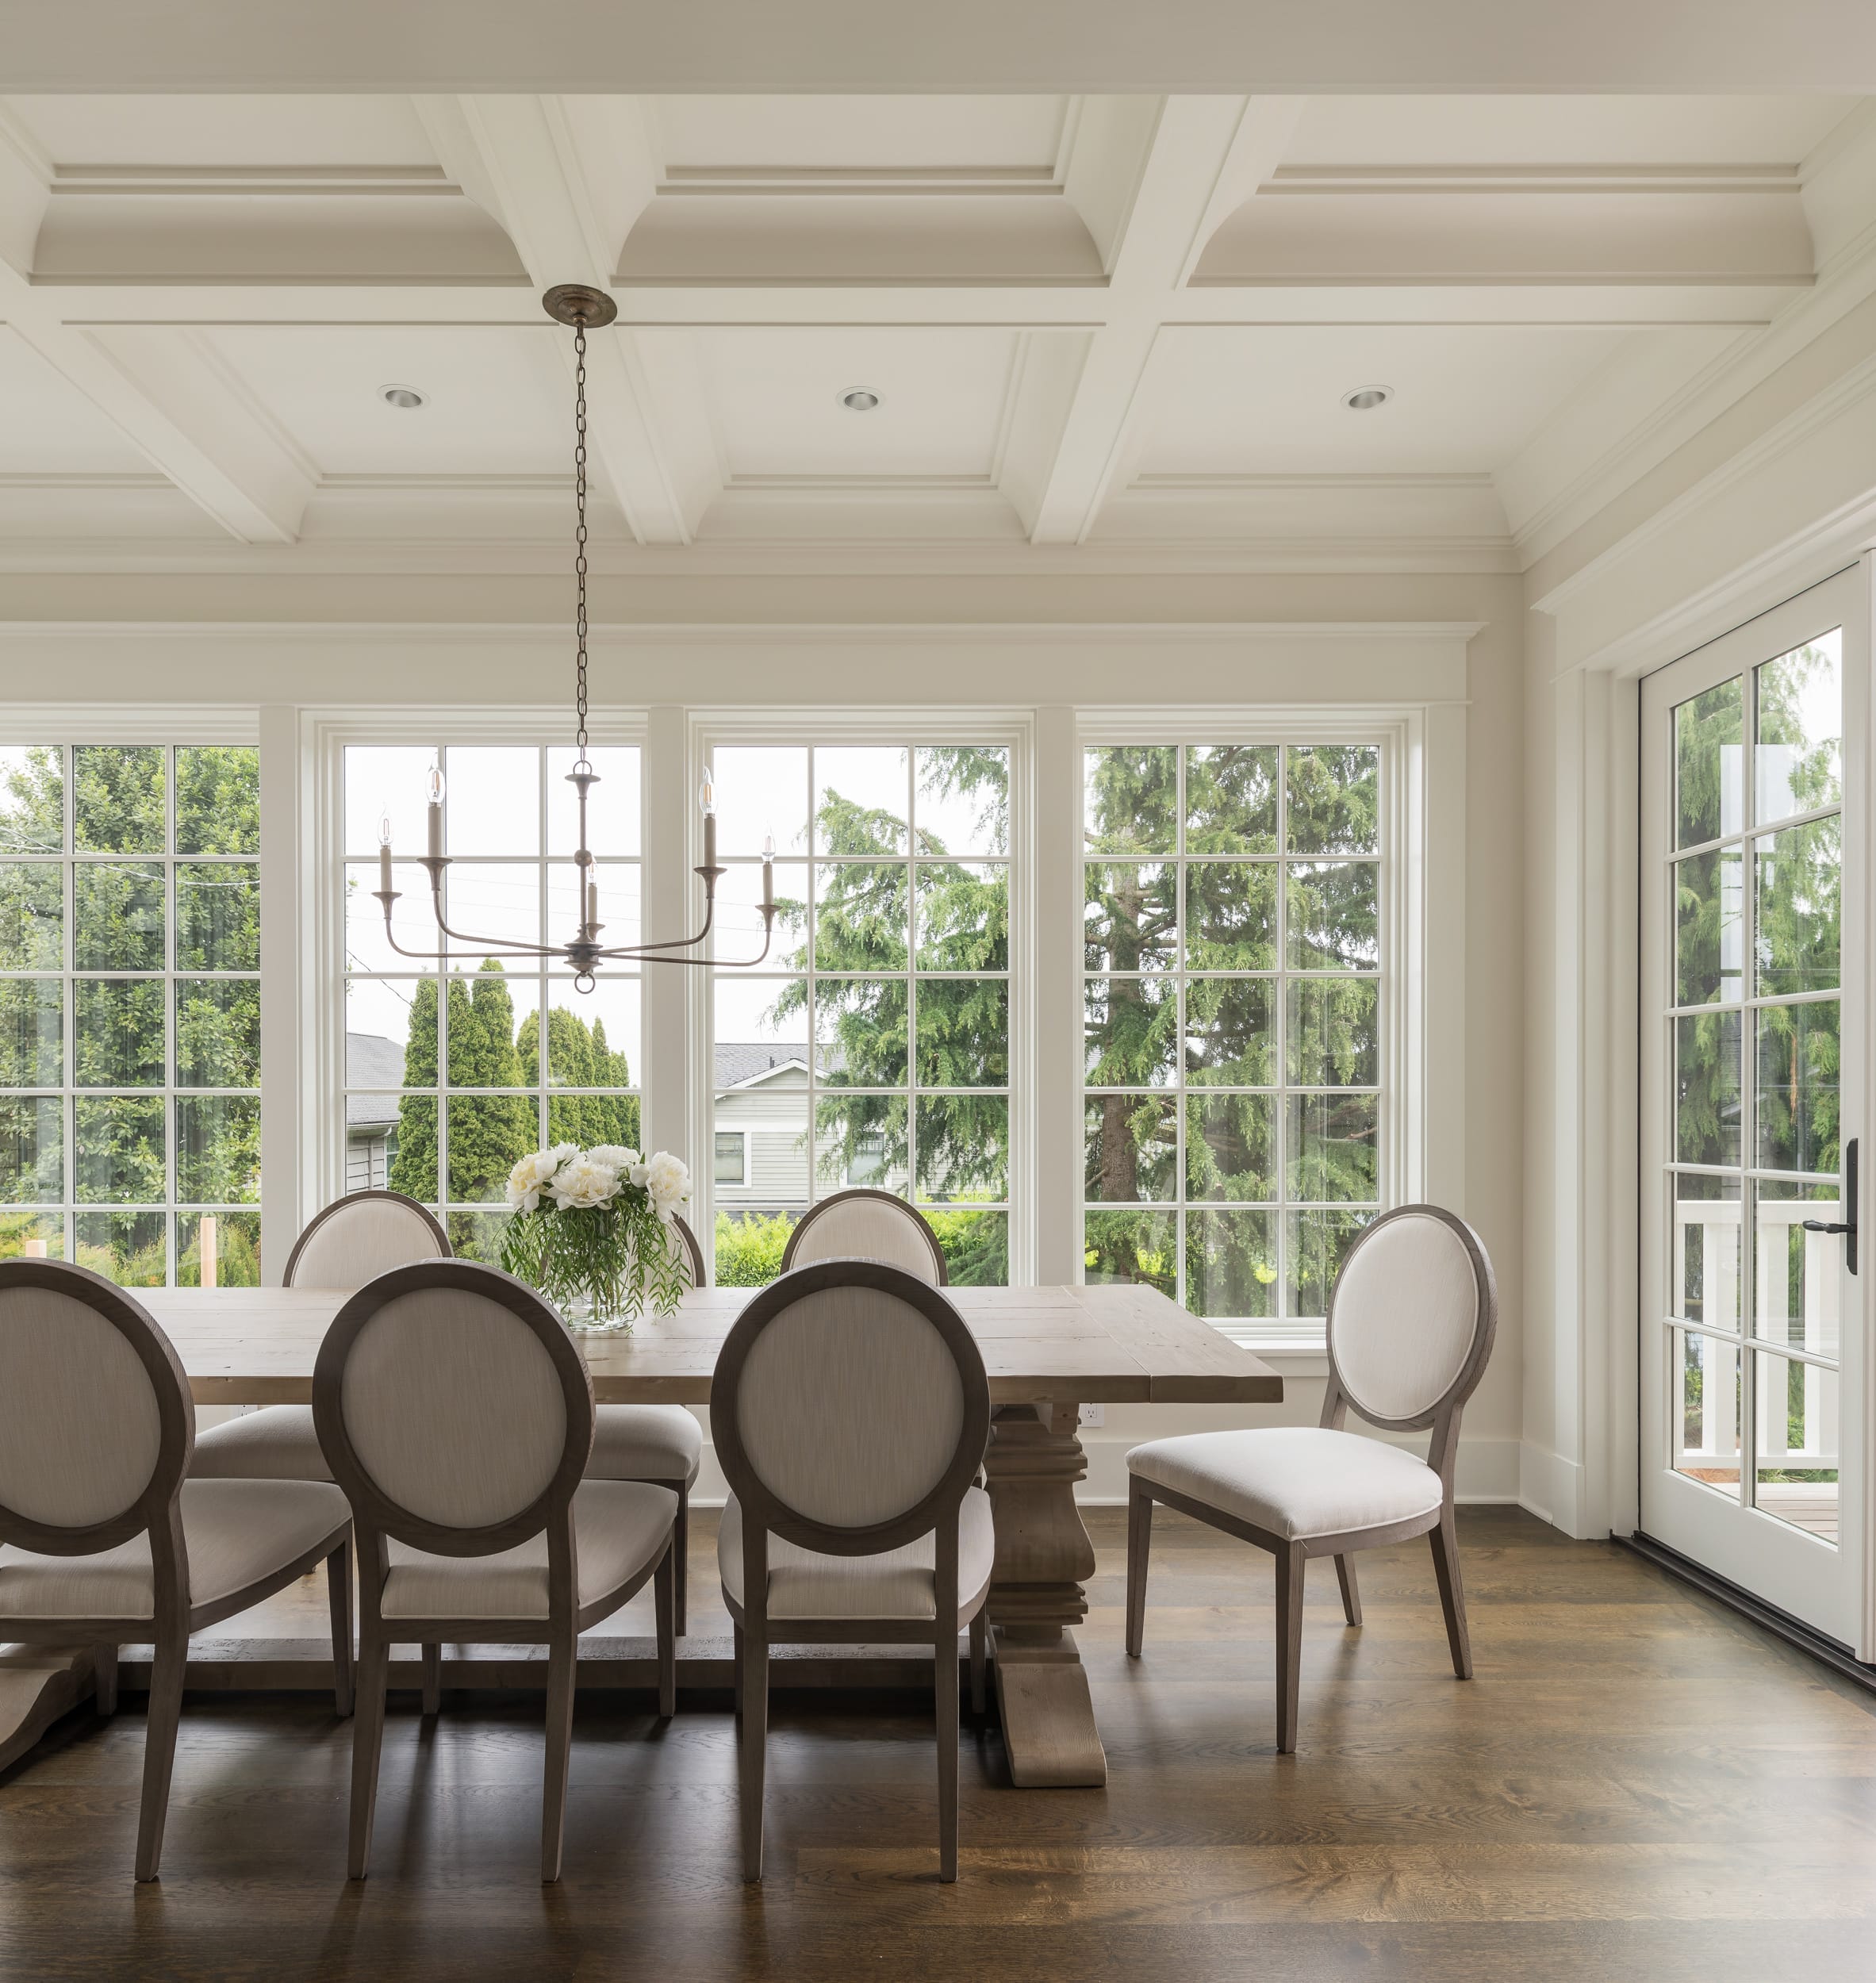 A dining room in a modern home with hardwood floors and large windows, crafted by a skilled carpenter.